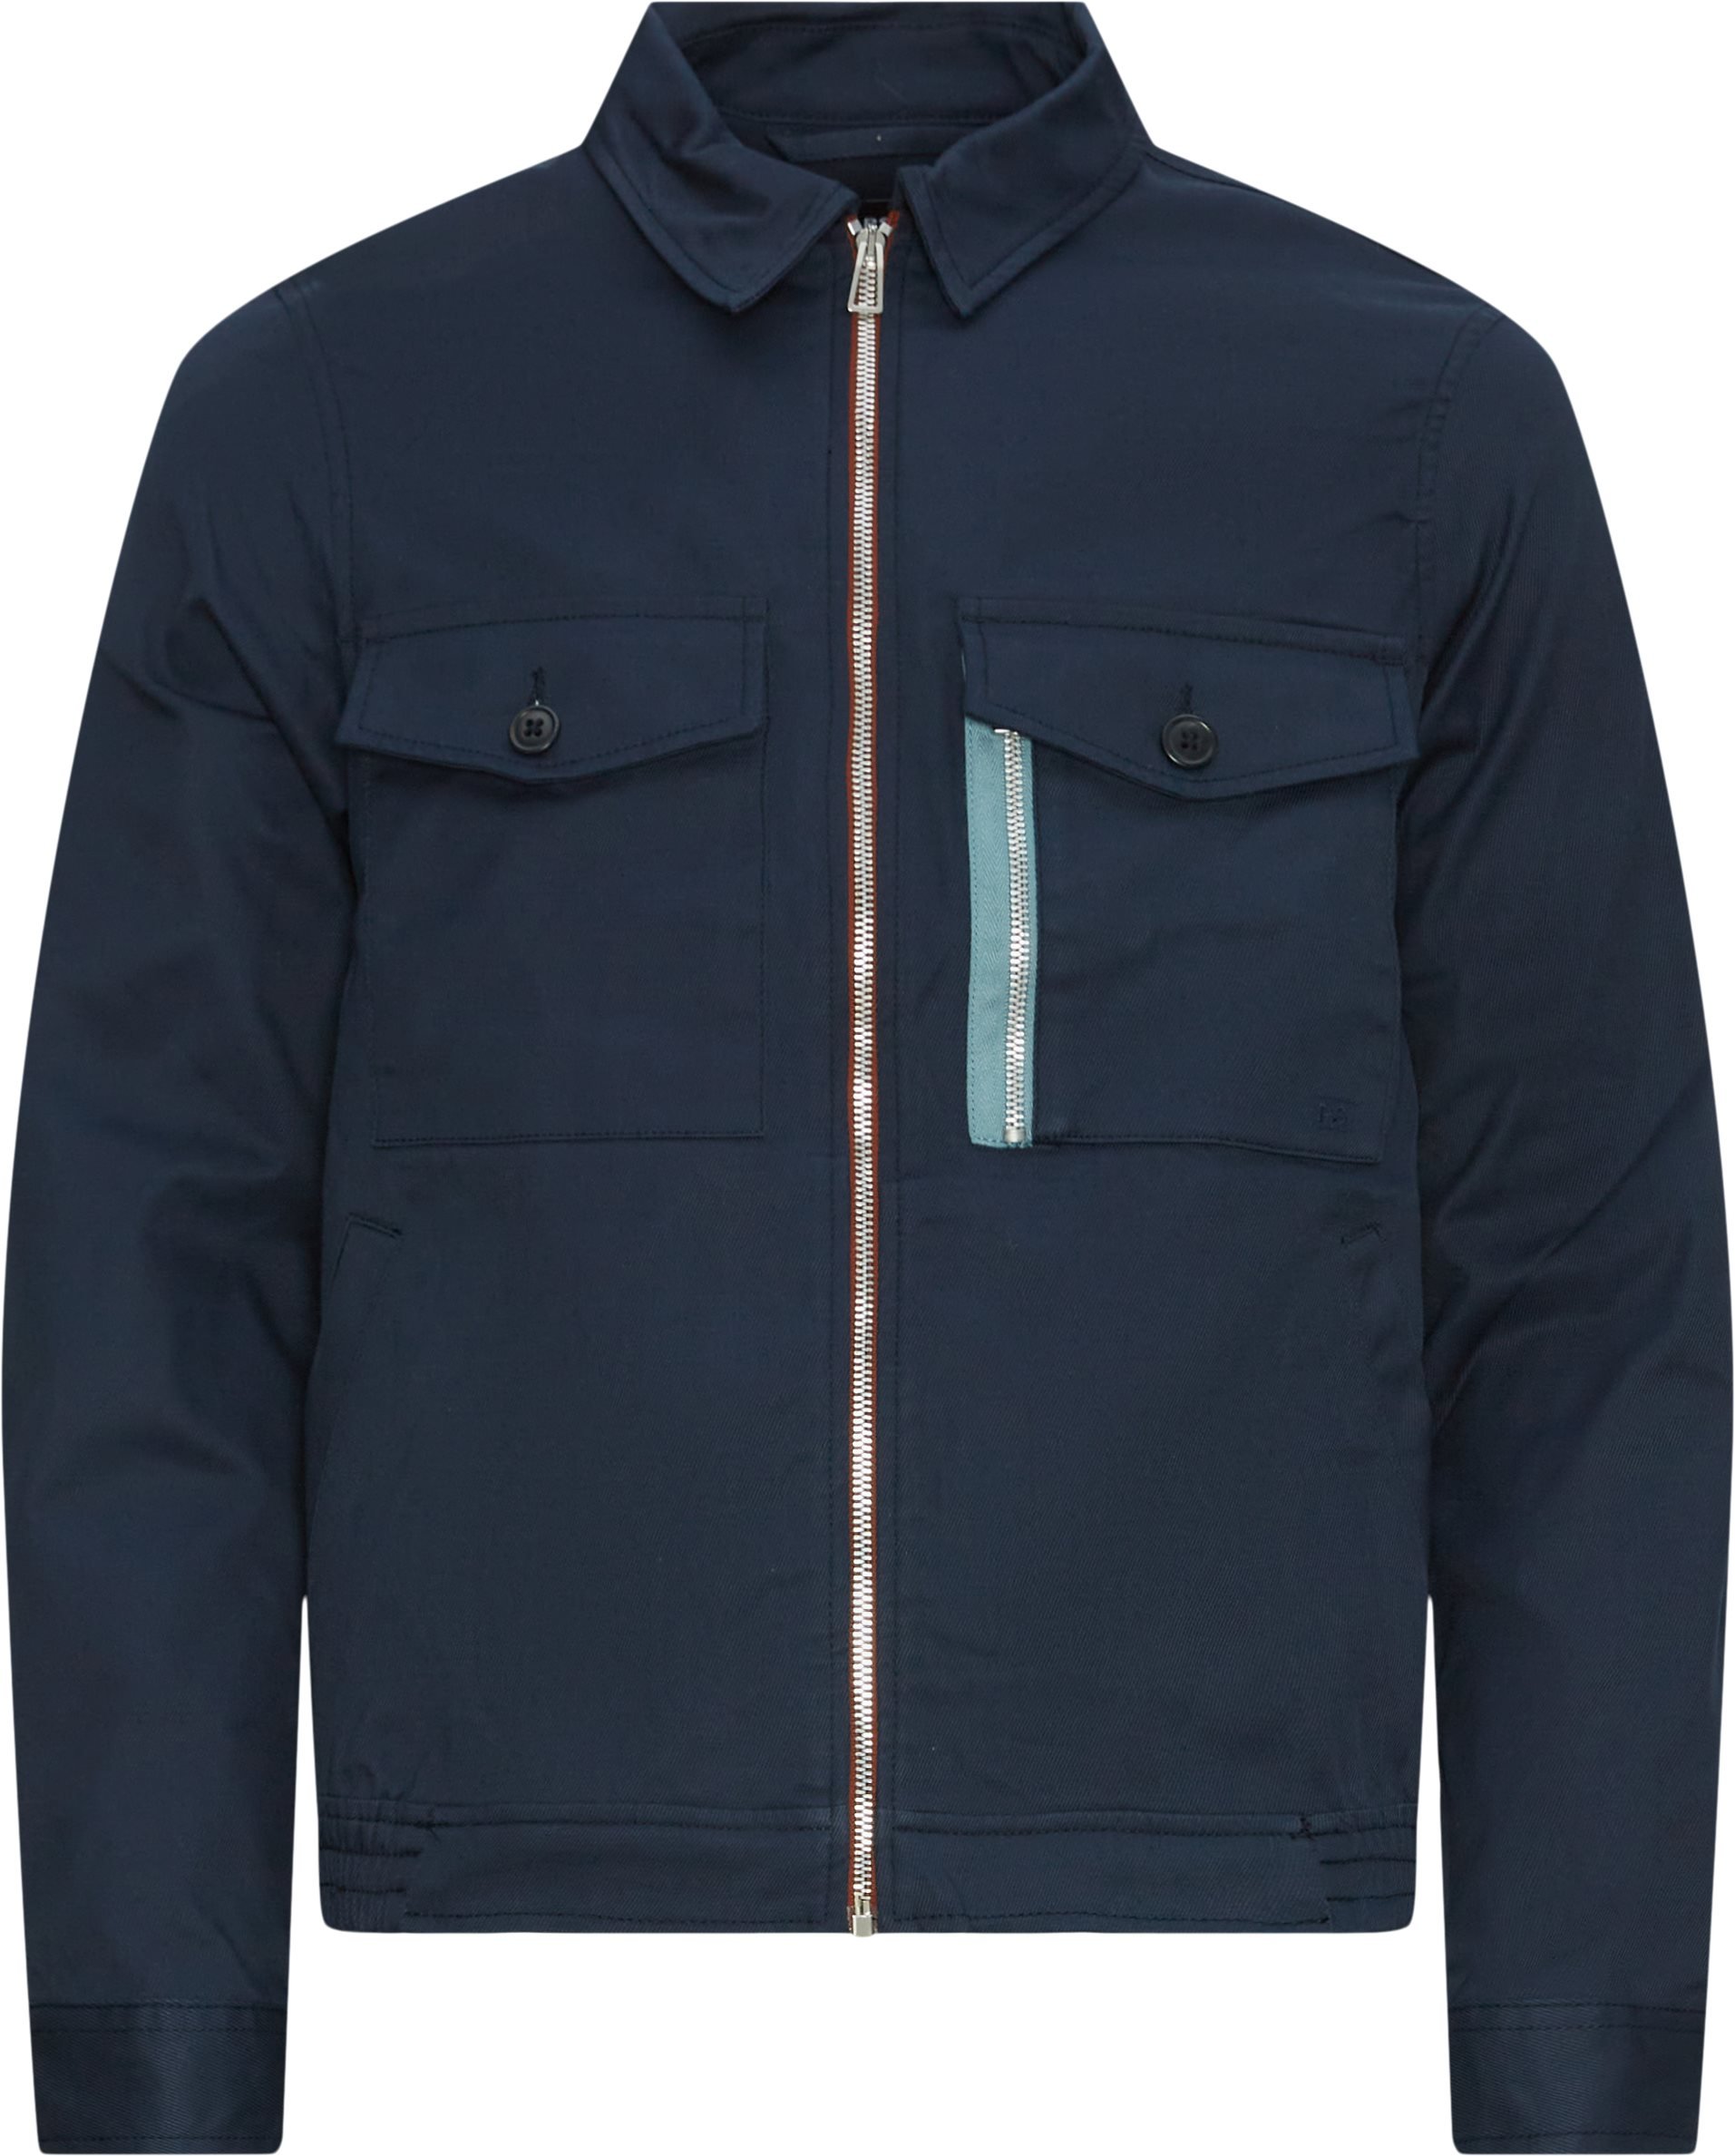 PS Paul Smith Jackets 714YT M21948 Blue